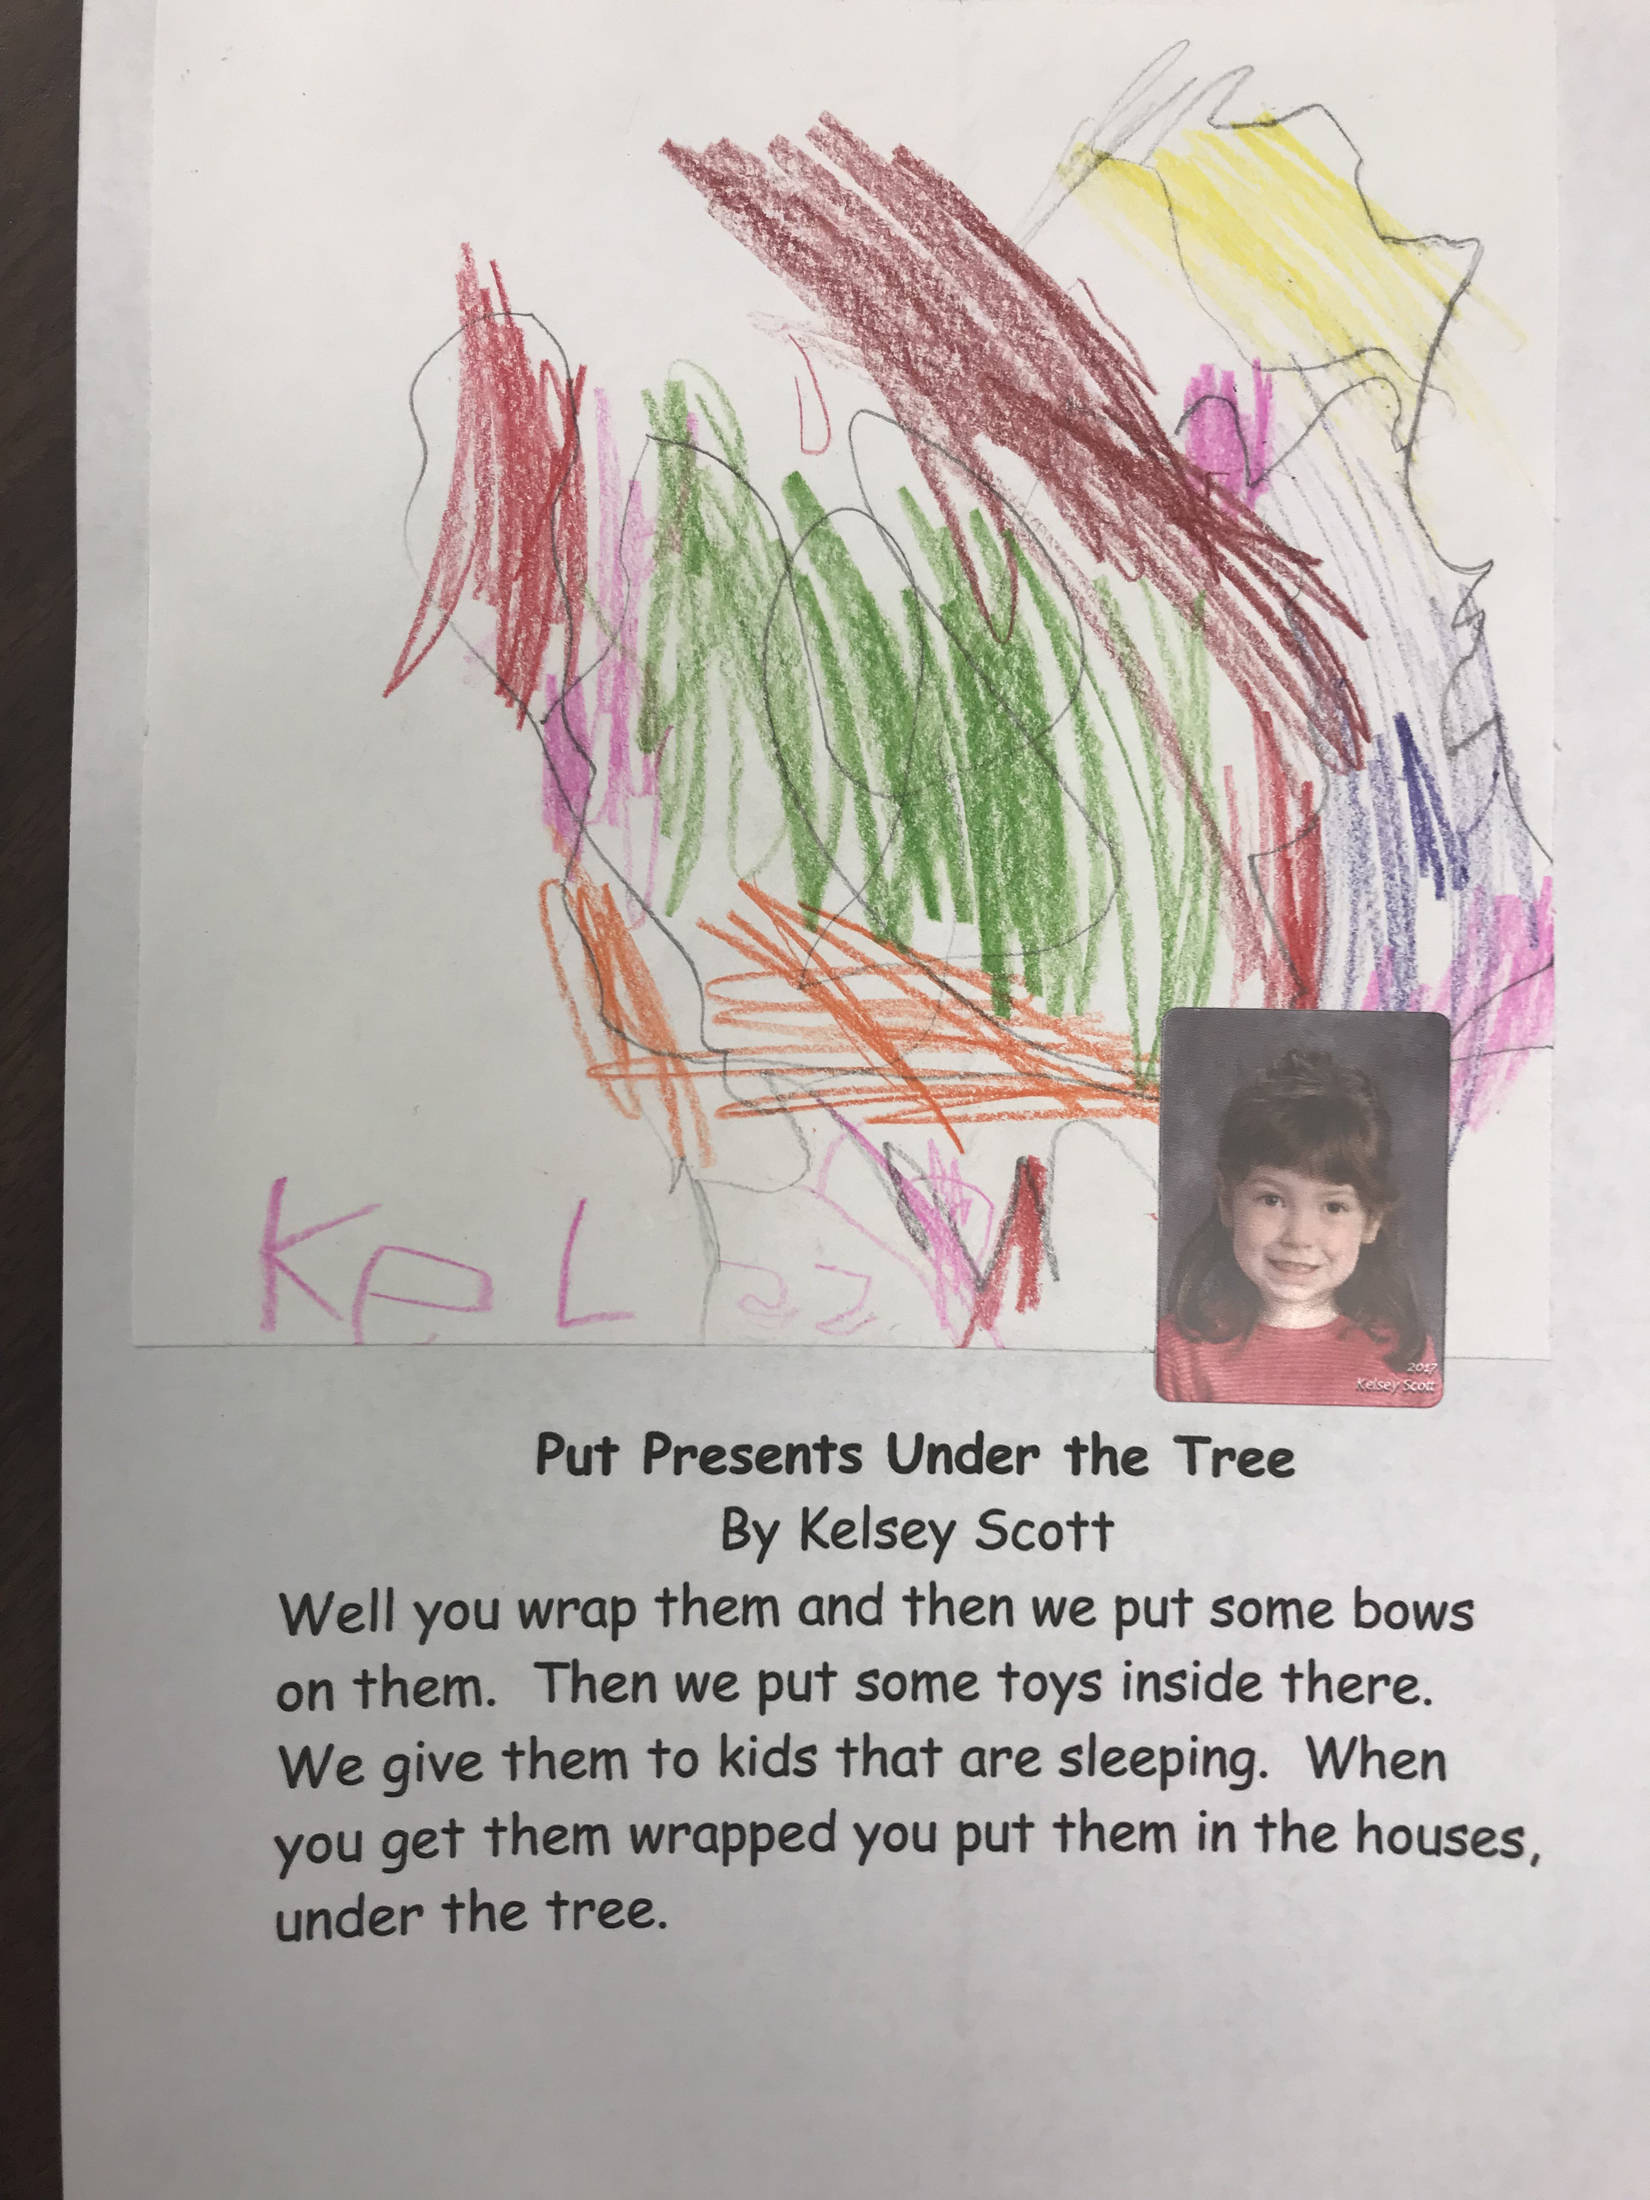 This holiday instruction made by Kelsey Scott is part of an 18-page “How to Get Ready for the Holidays” book created by the students of Jennifer Reinhart’s kindergarten class. (Photo courtesy Jennifer Reinhart)